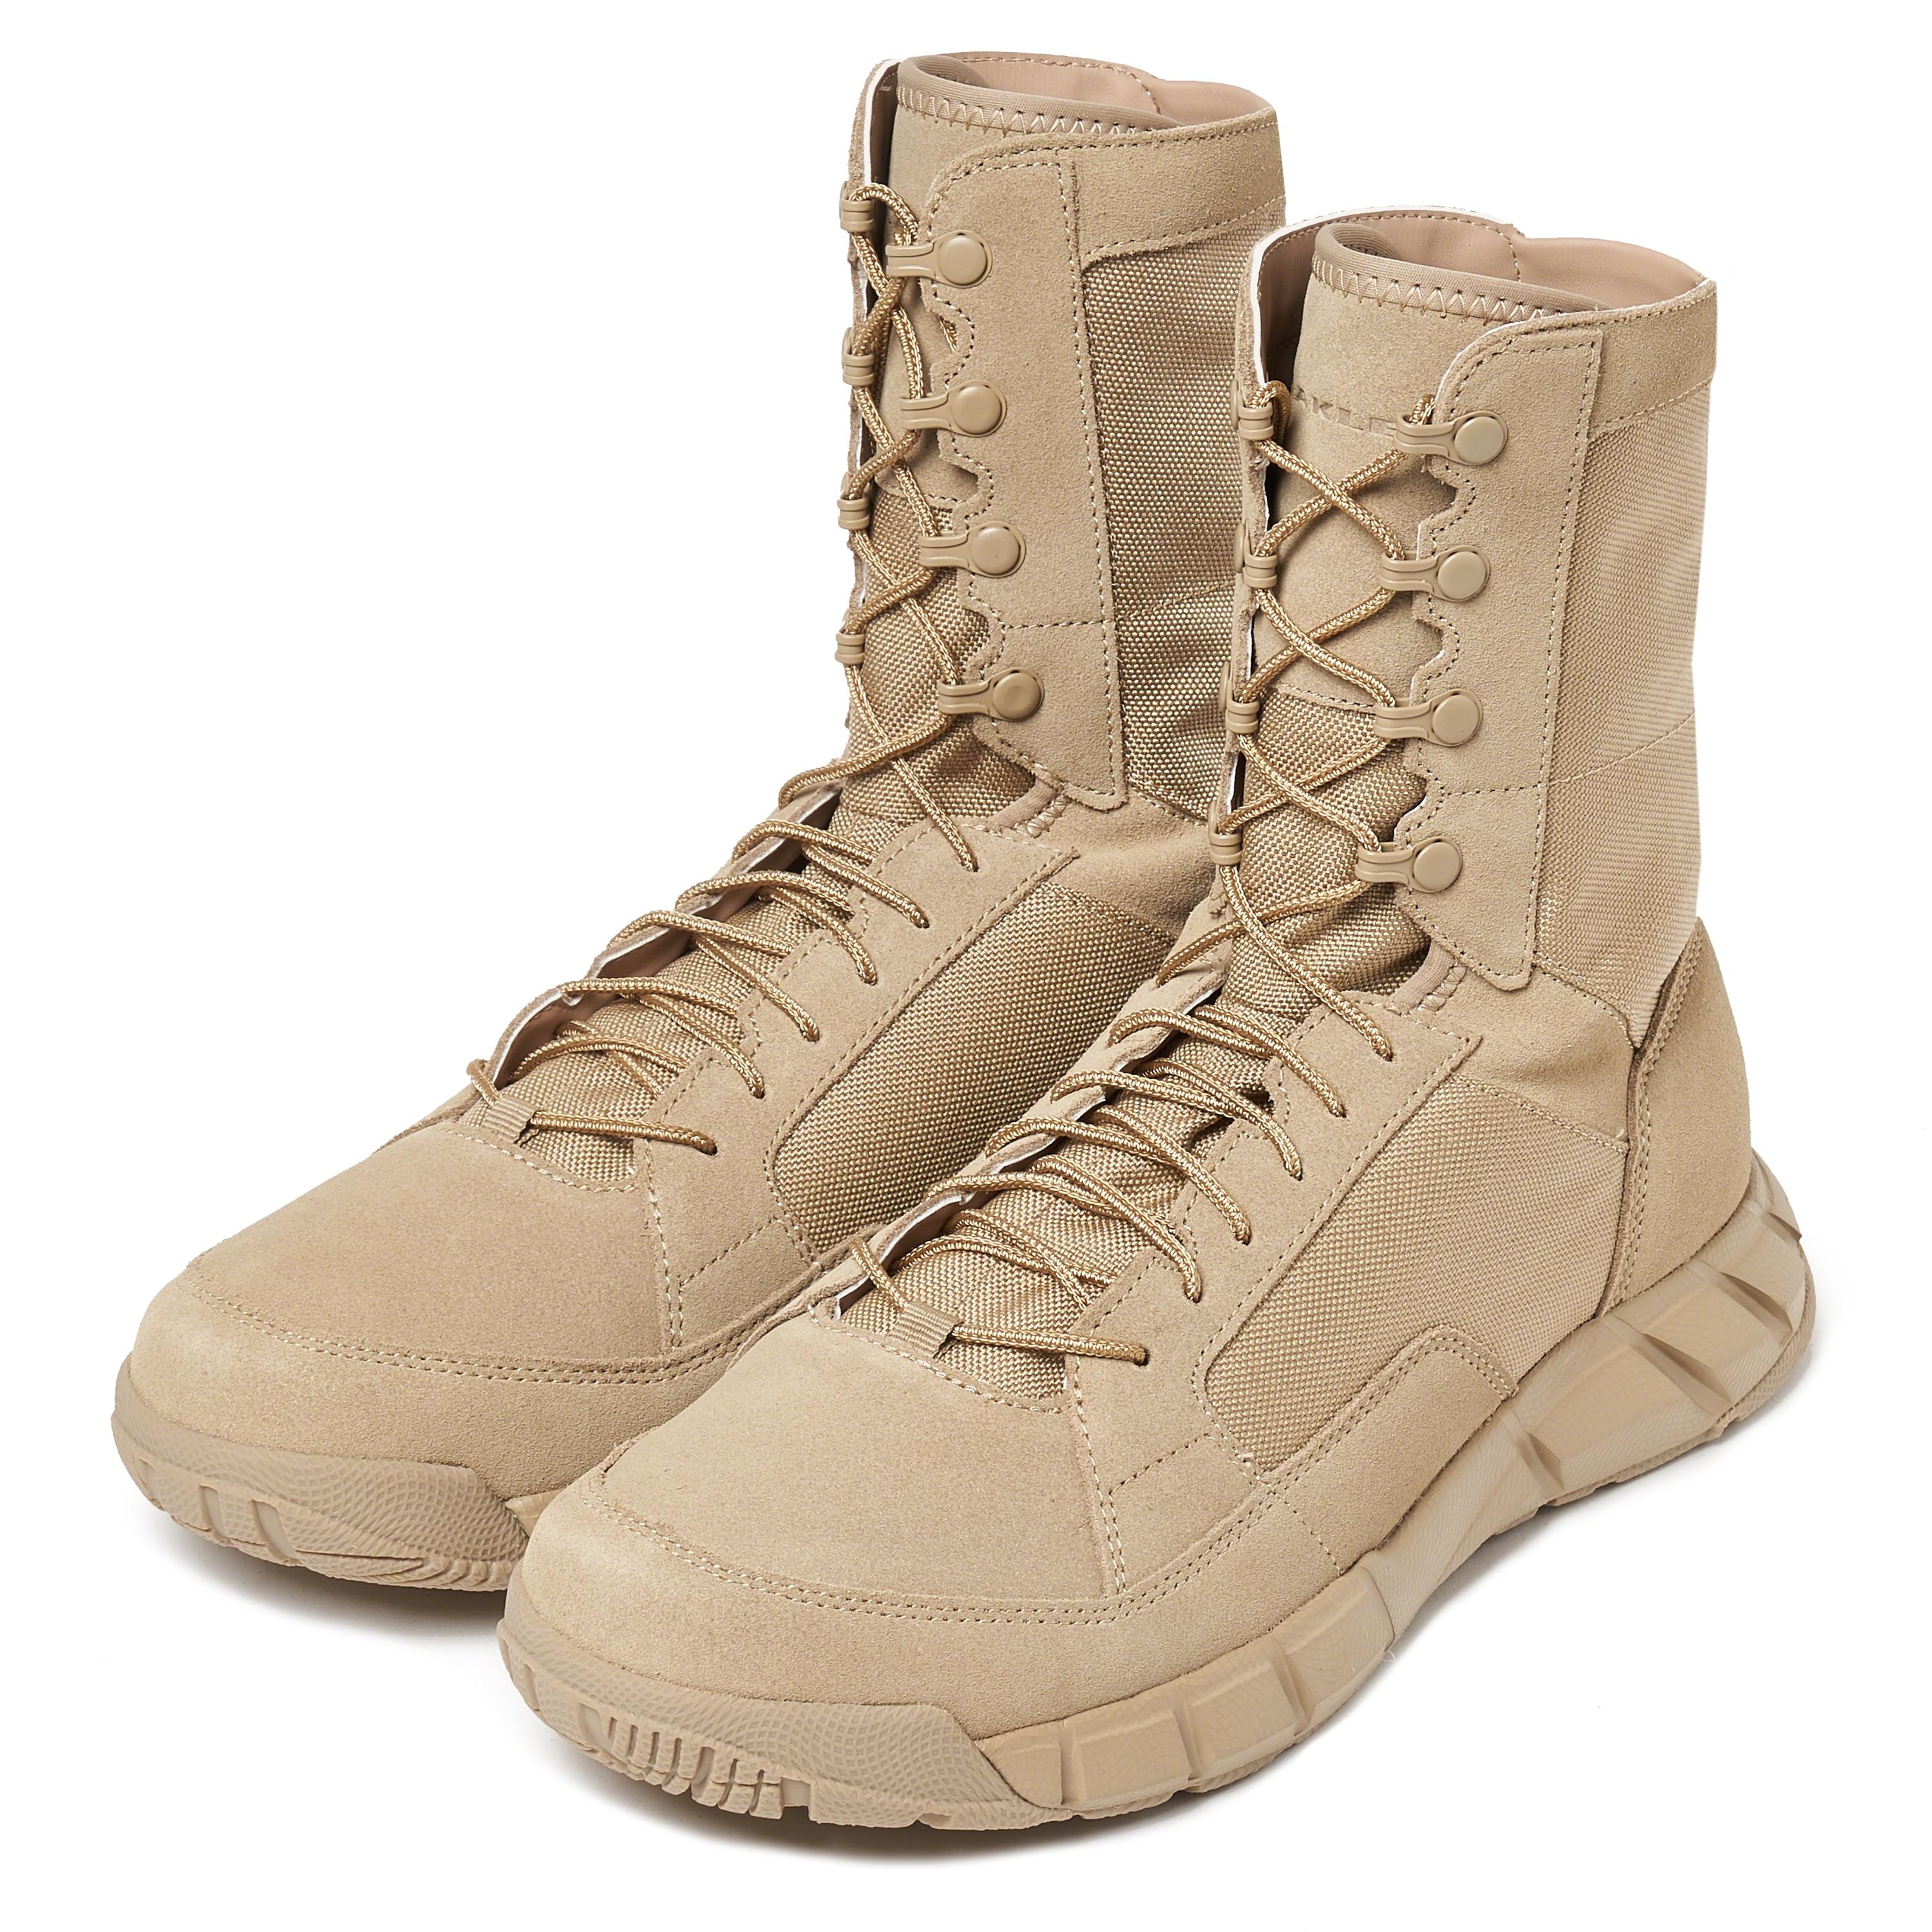 Oakley Synthetic Light Assault Boot 2 in Natural for Men - Lyst